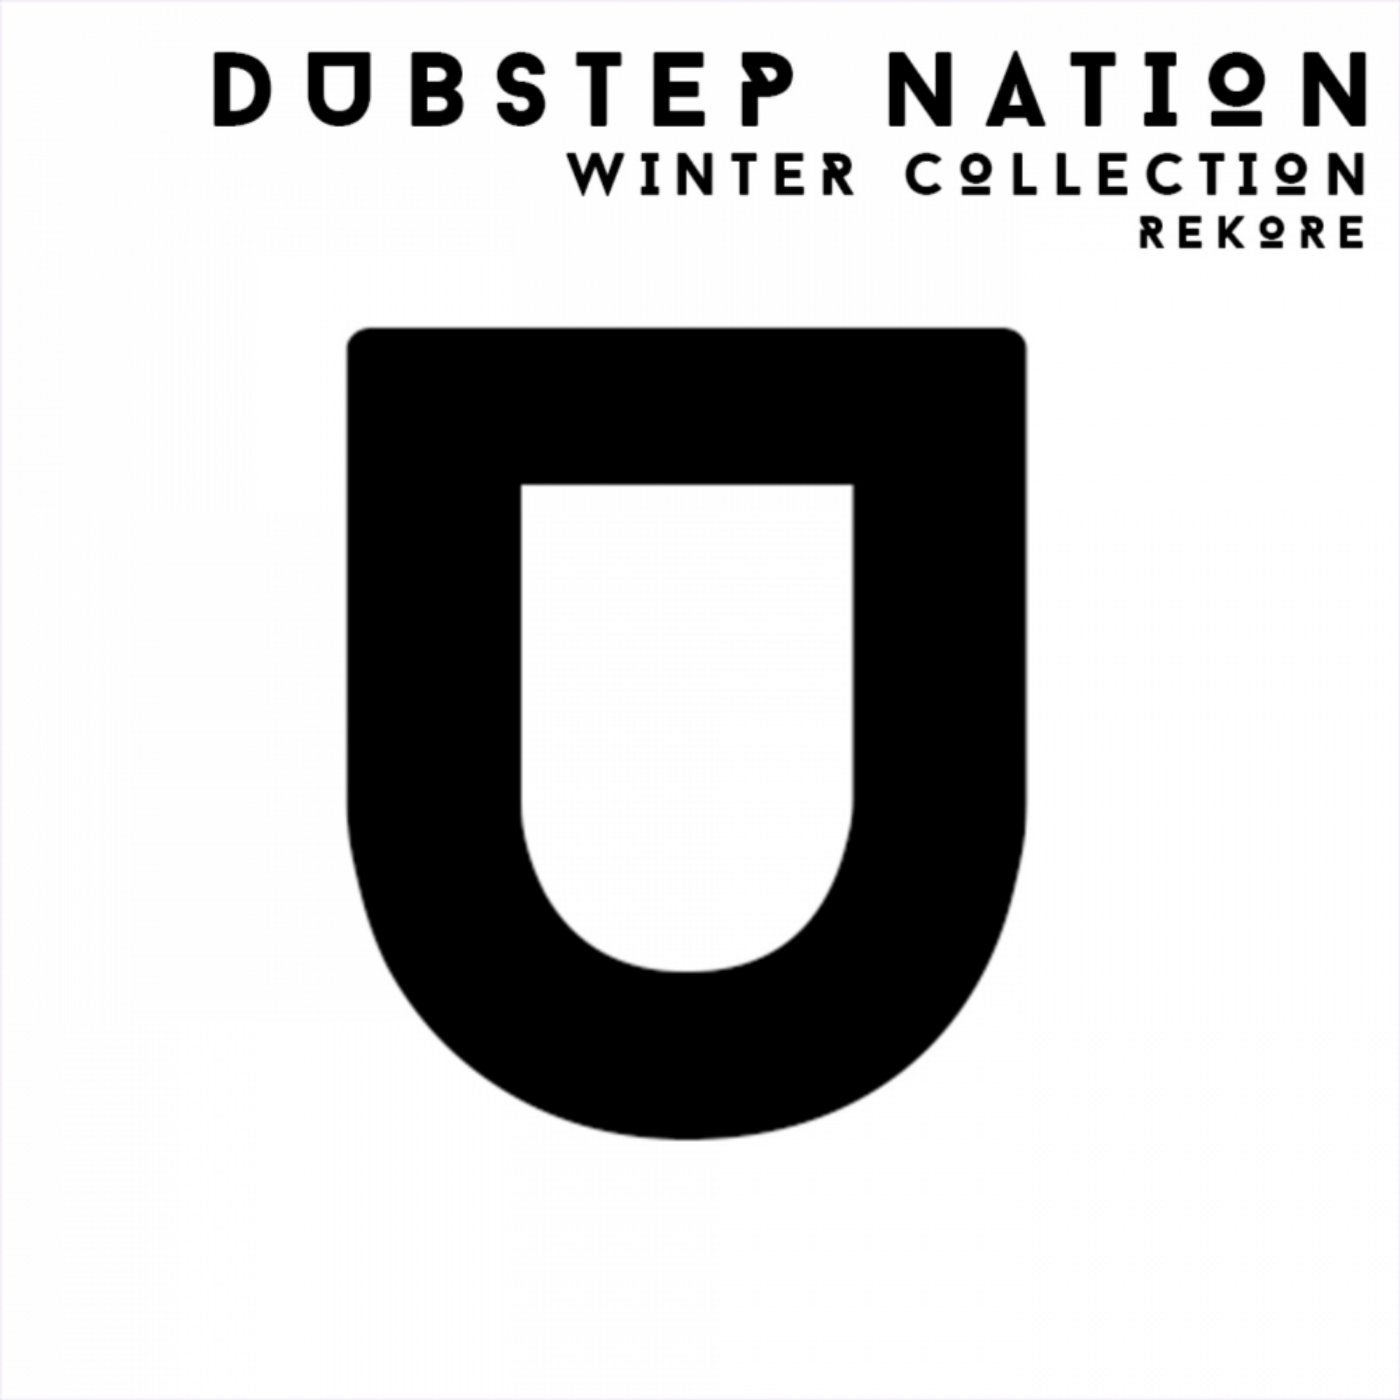 Dubstep Nation. Winter Collection. Rekore